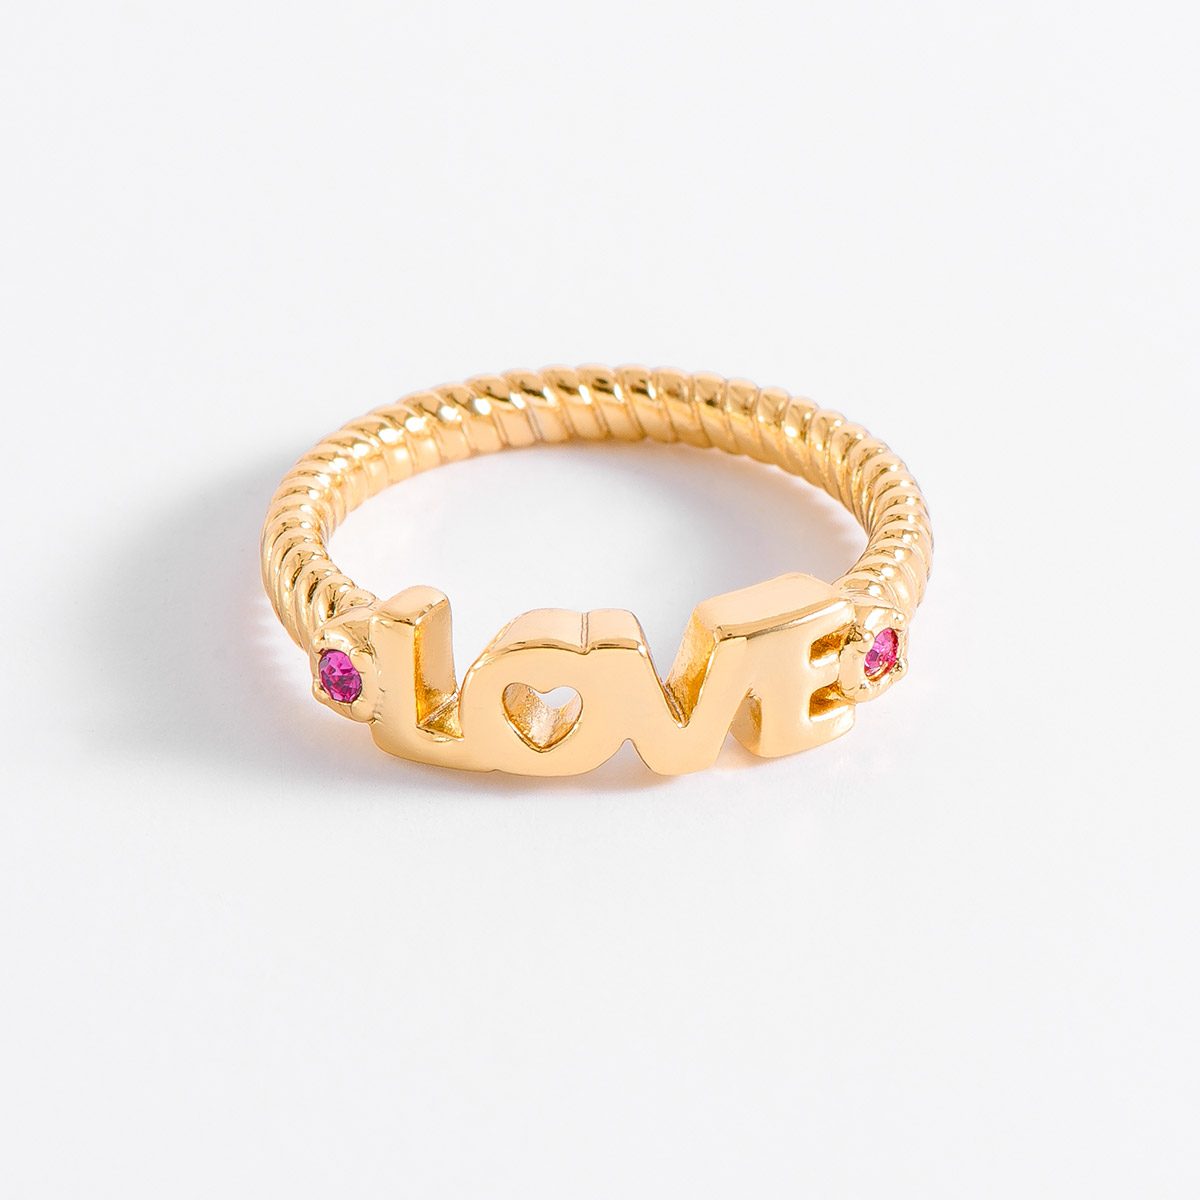 Charming ring with the word LOVE in gold plating, set with two fuchsia-toned stones. Combine with your necklace and bracelet set.
-        Ring
-        Sizes 6 to 9
-        18k gold plating
-        Fuchsia-toned stones
